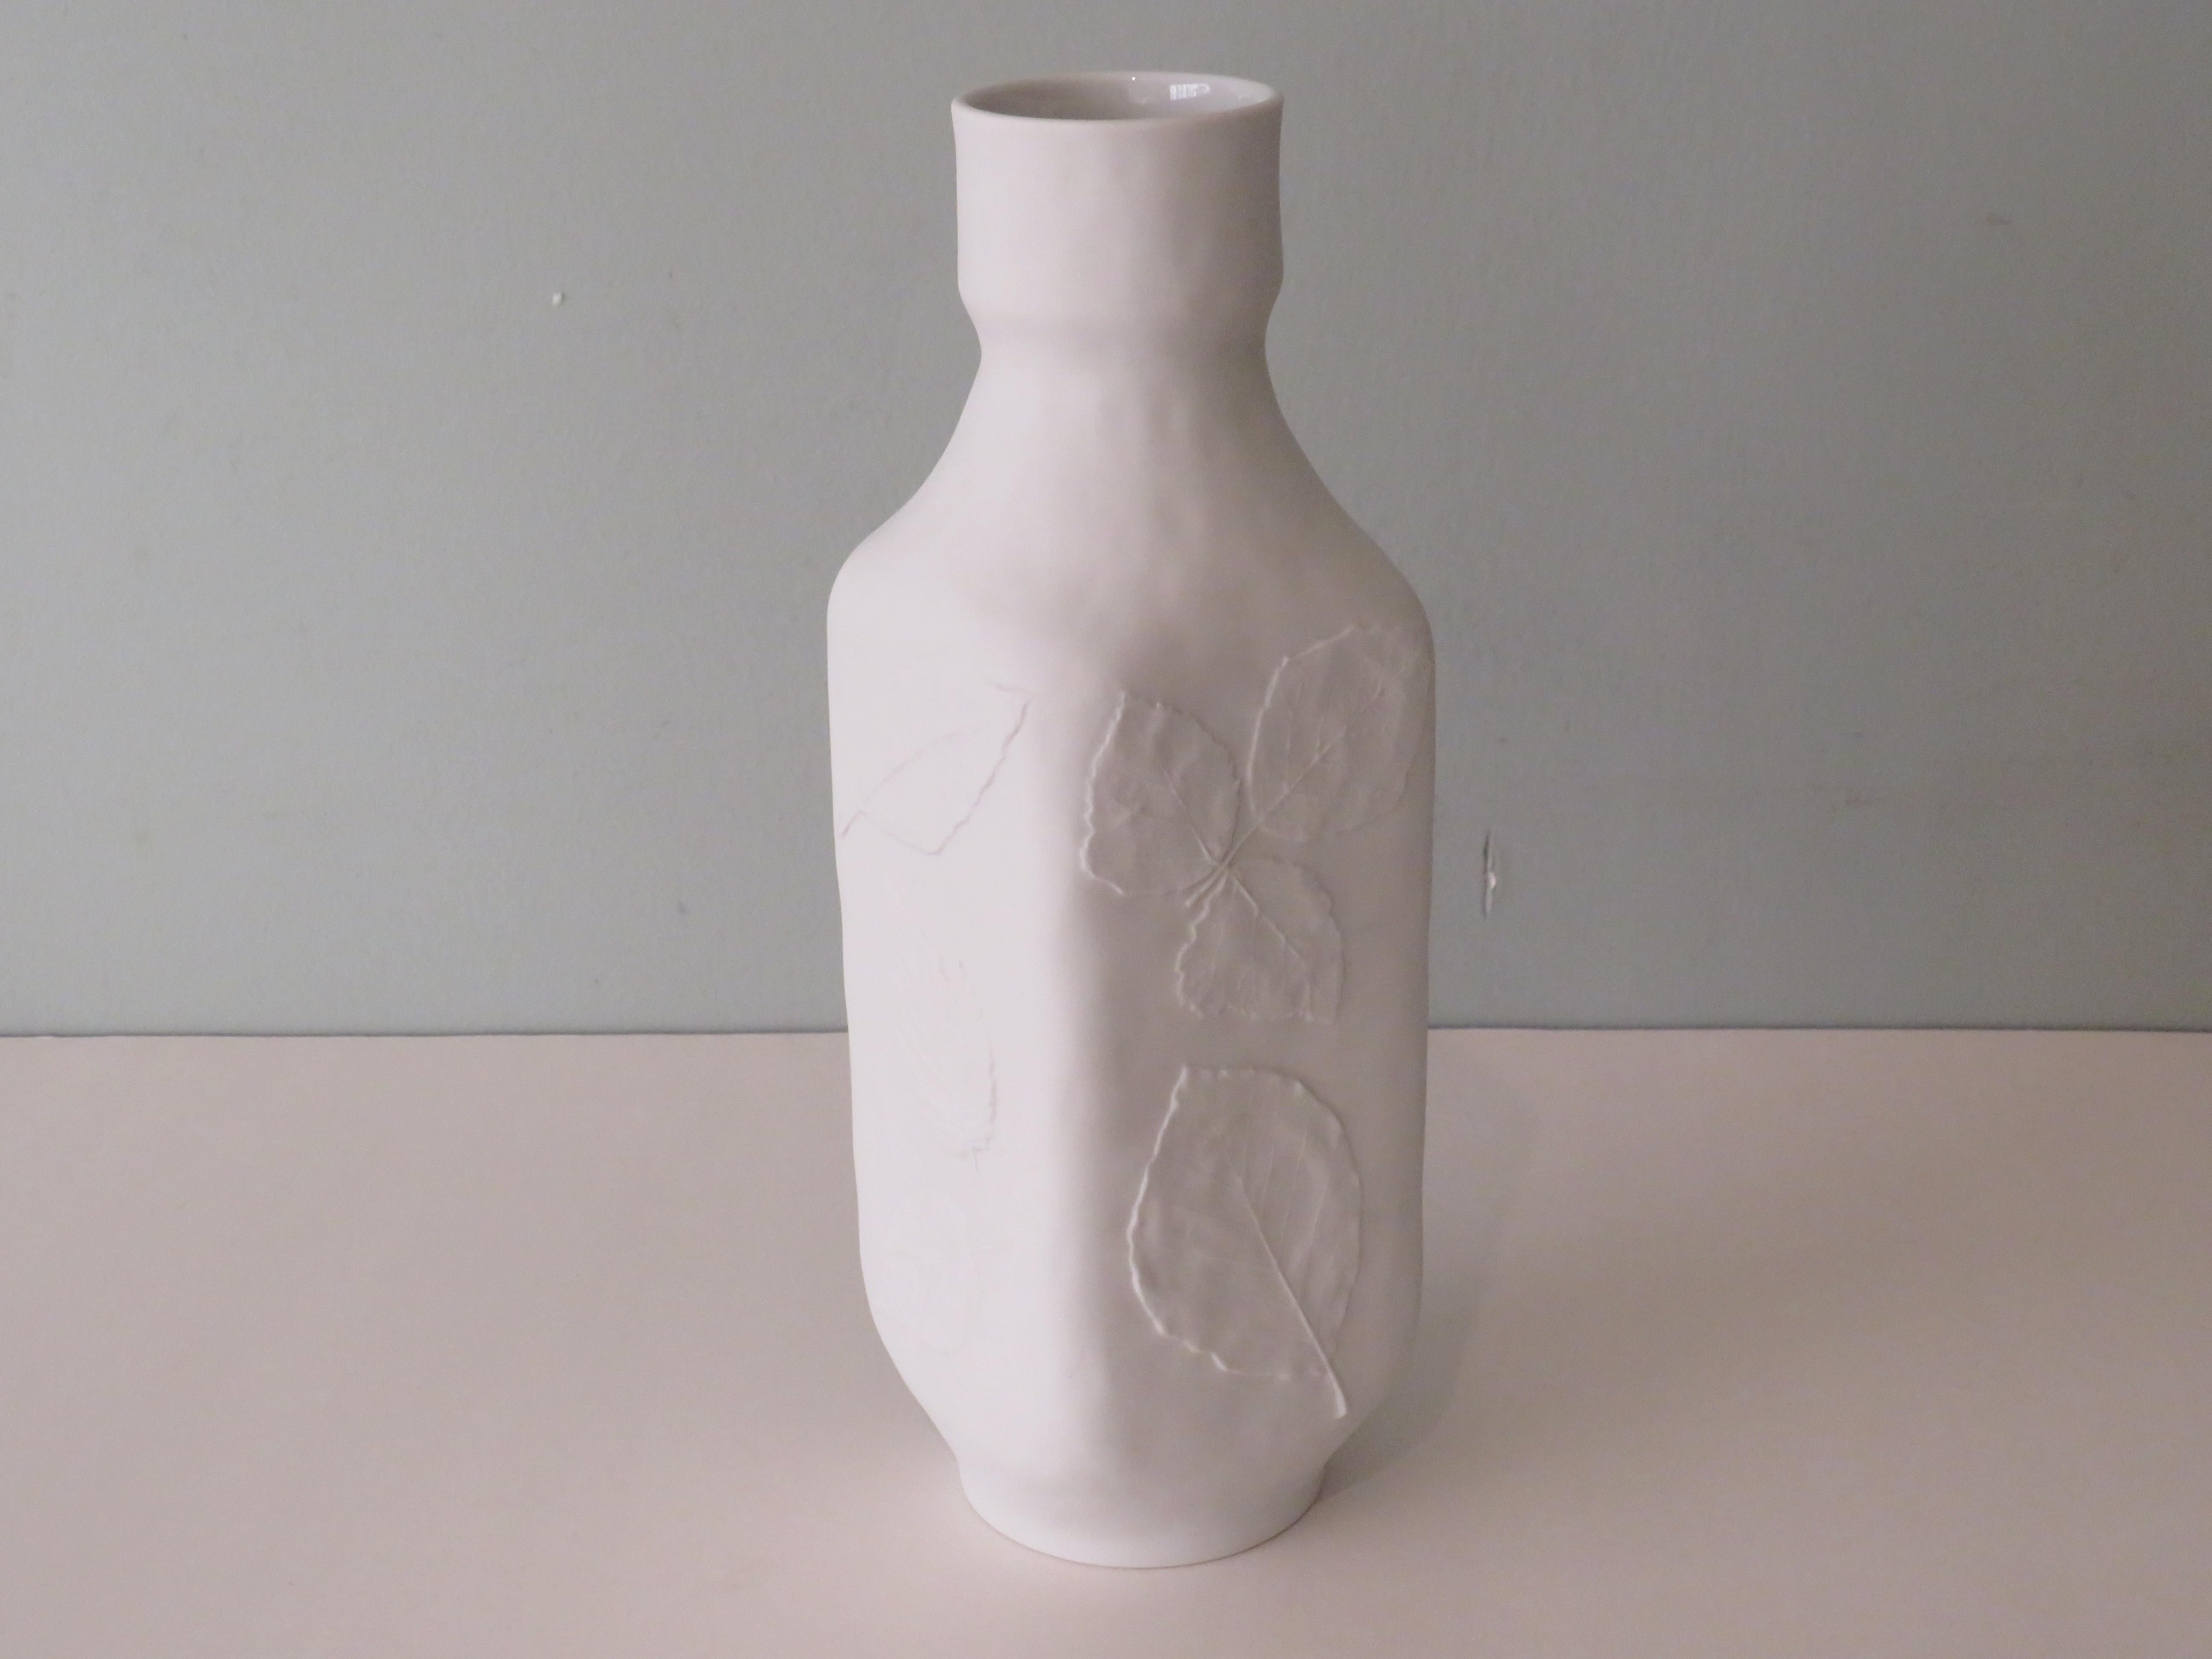 Porcelain White Biscuit Vase with Floral Embossed Motif, Hutschenreuther, Germany, 1970s For Sale